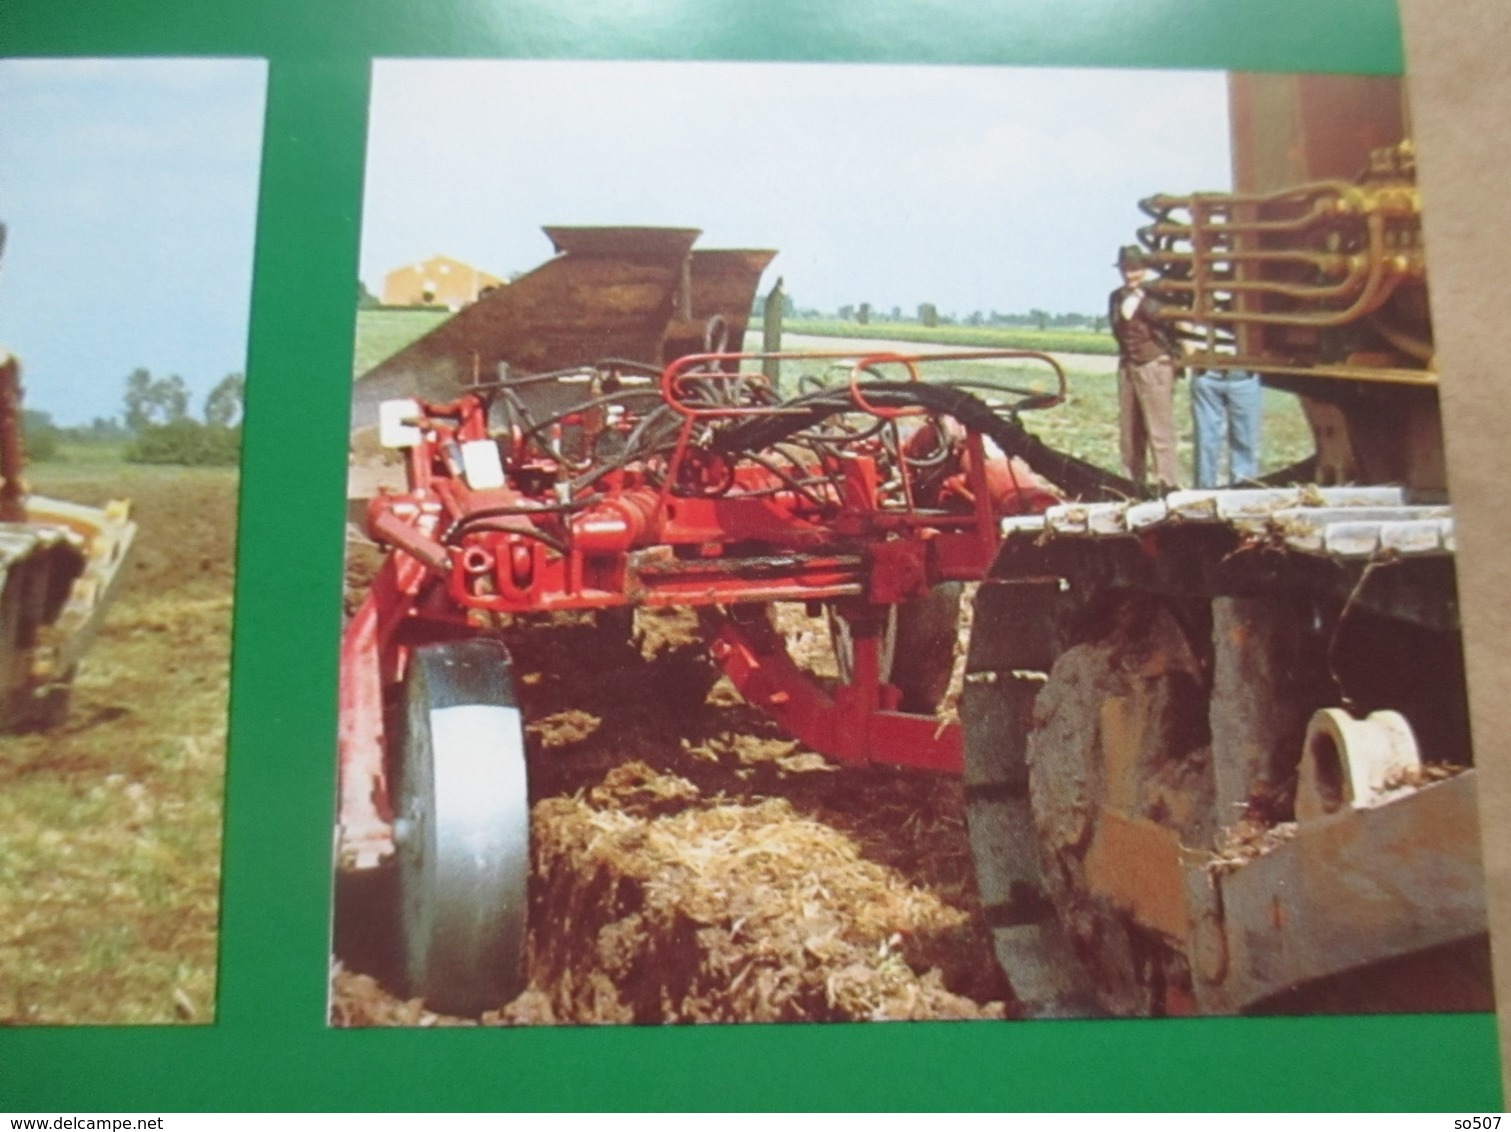 Greco Machine-Types of Fiat Tractor, Agricultural Machines- Catalog, Prospekt, Brochure- Italy